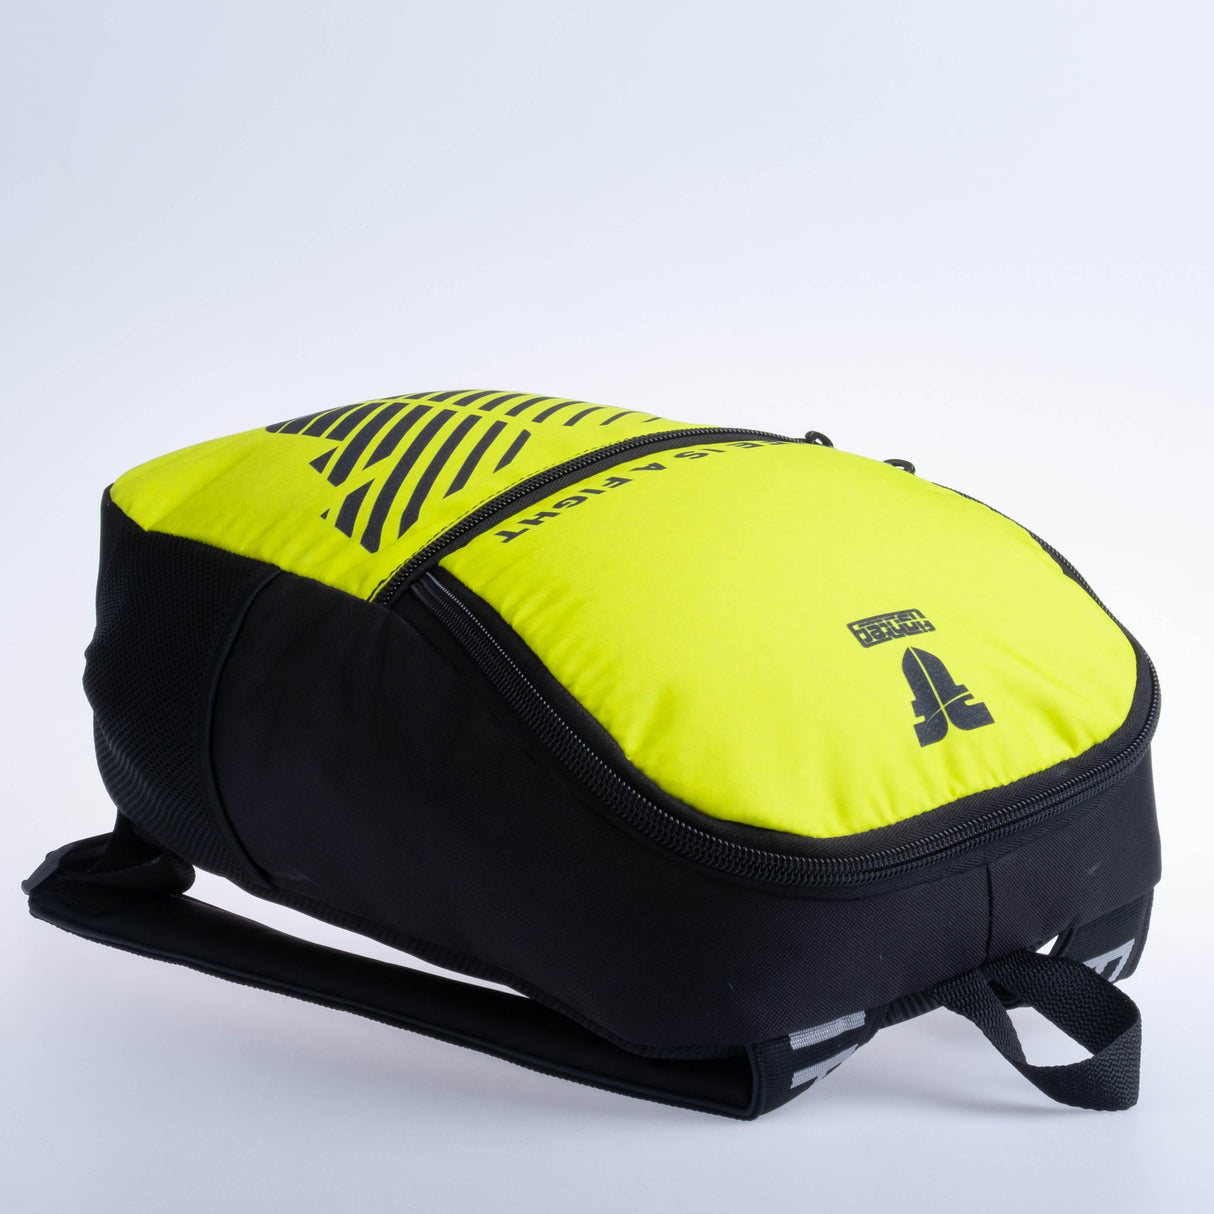 Sac à dos Fighter taille S - jaune fluo